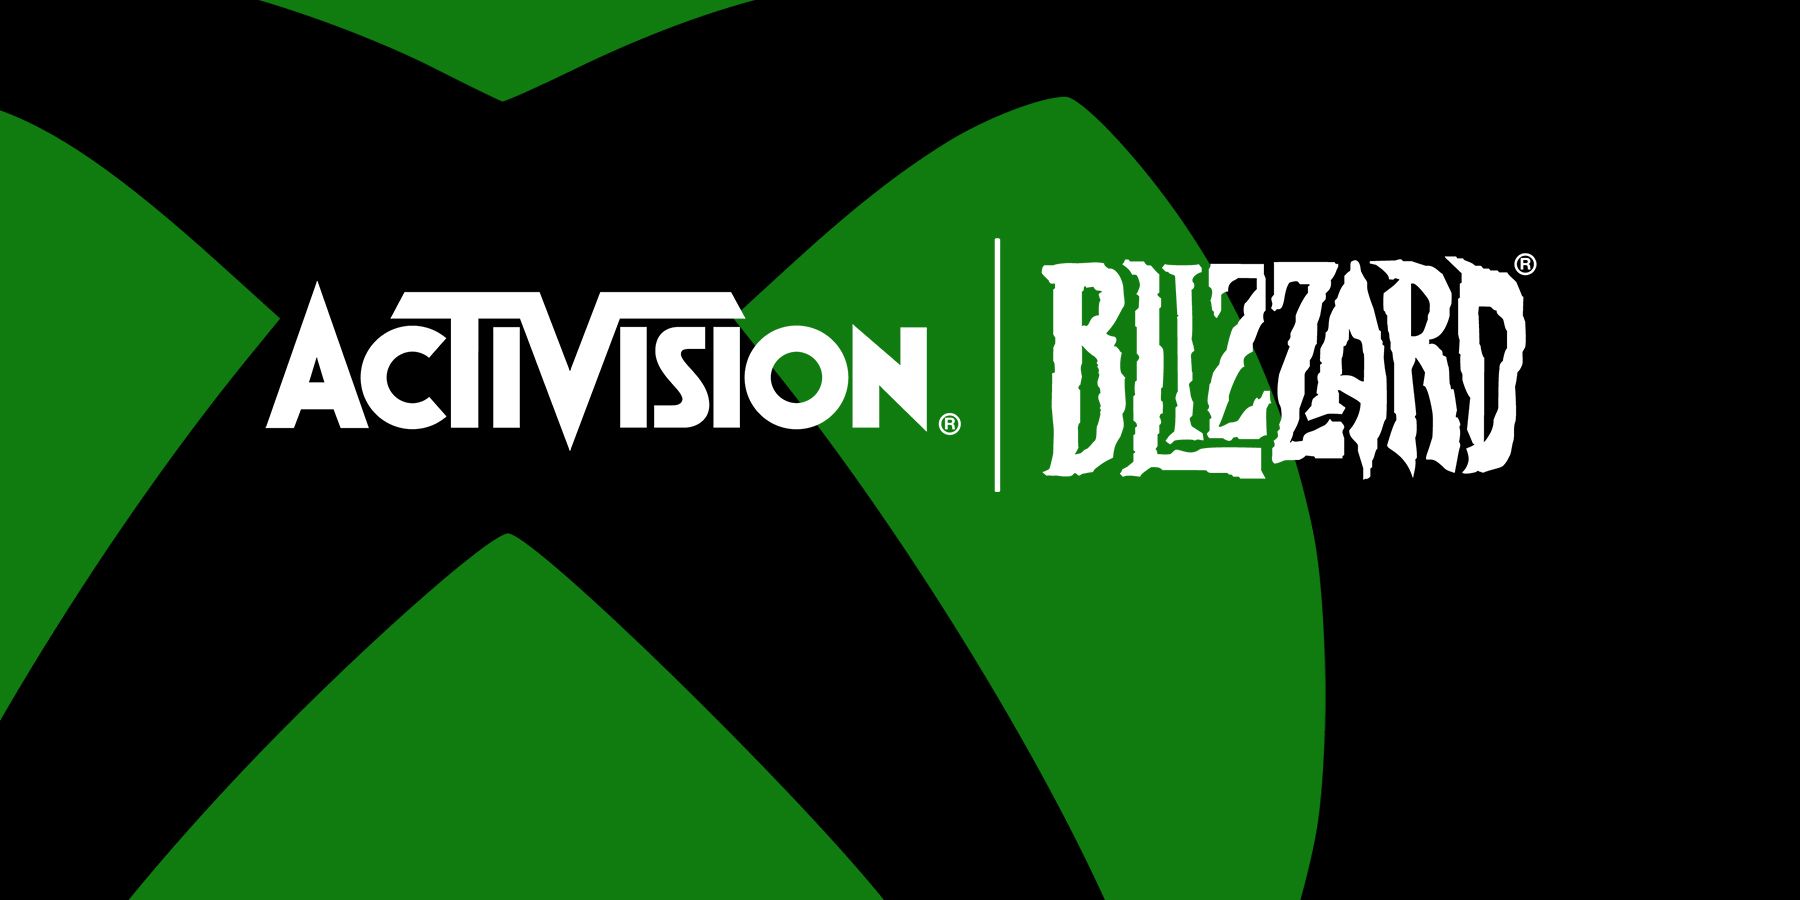 XB News (Not affiliated with Xbox) on X: The future of Xbox Game Pass is  bright! This is just one franchises that will hit the service once the  Activision Blizzard deal is